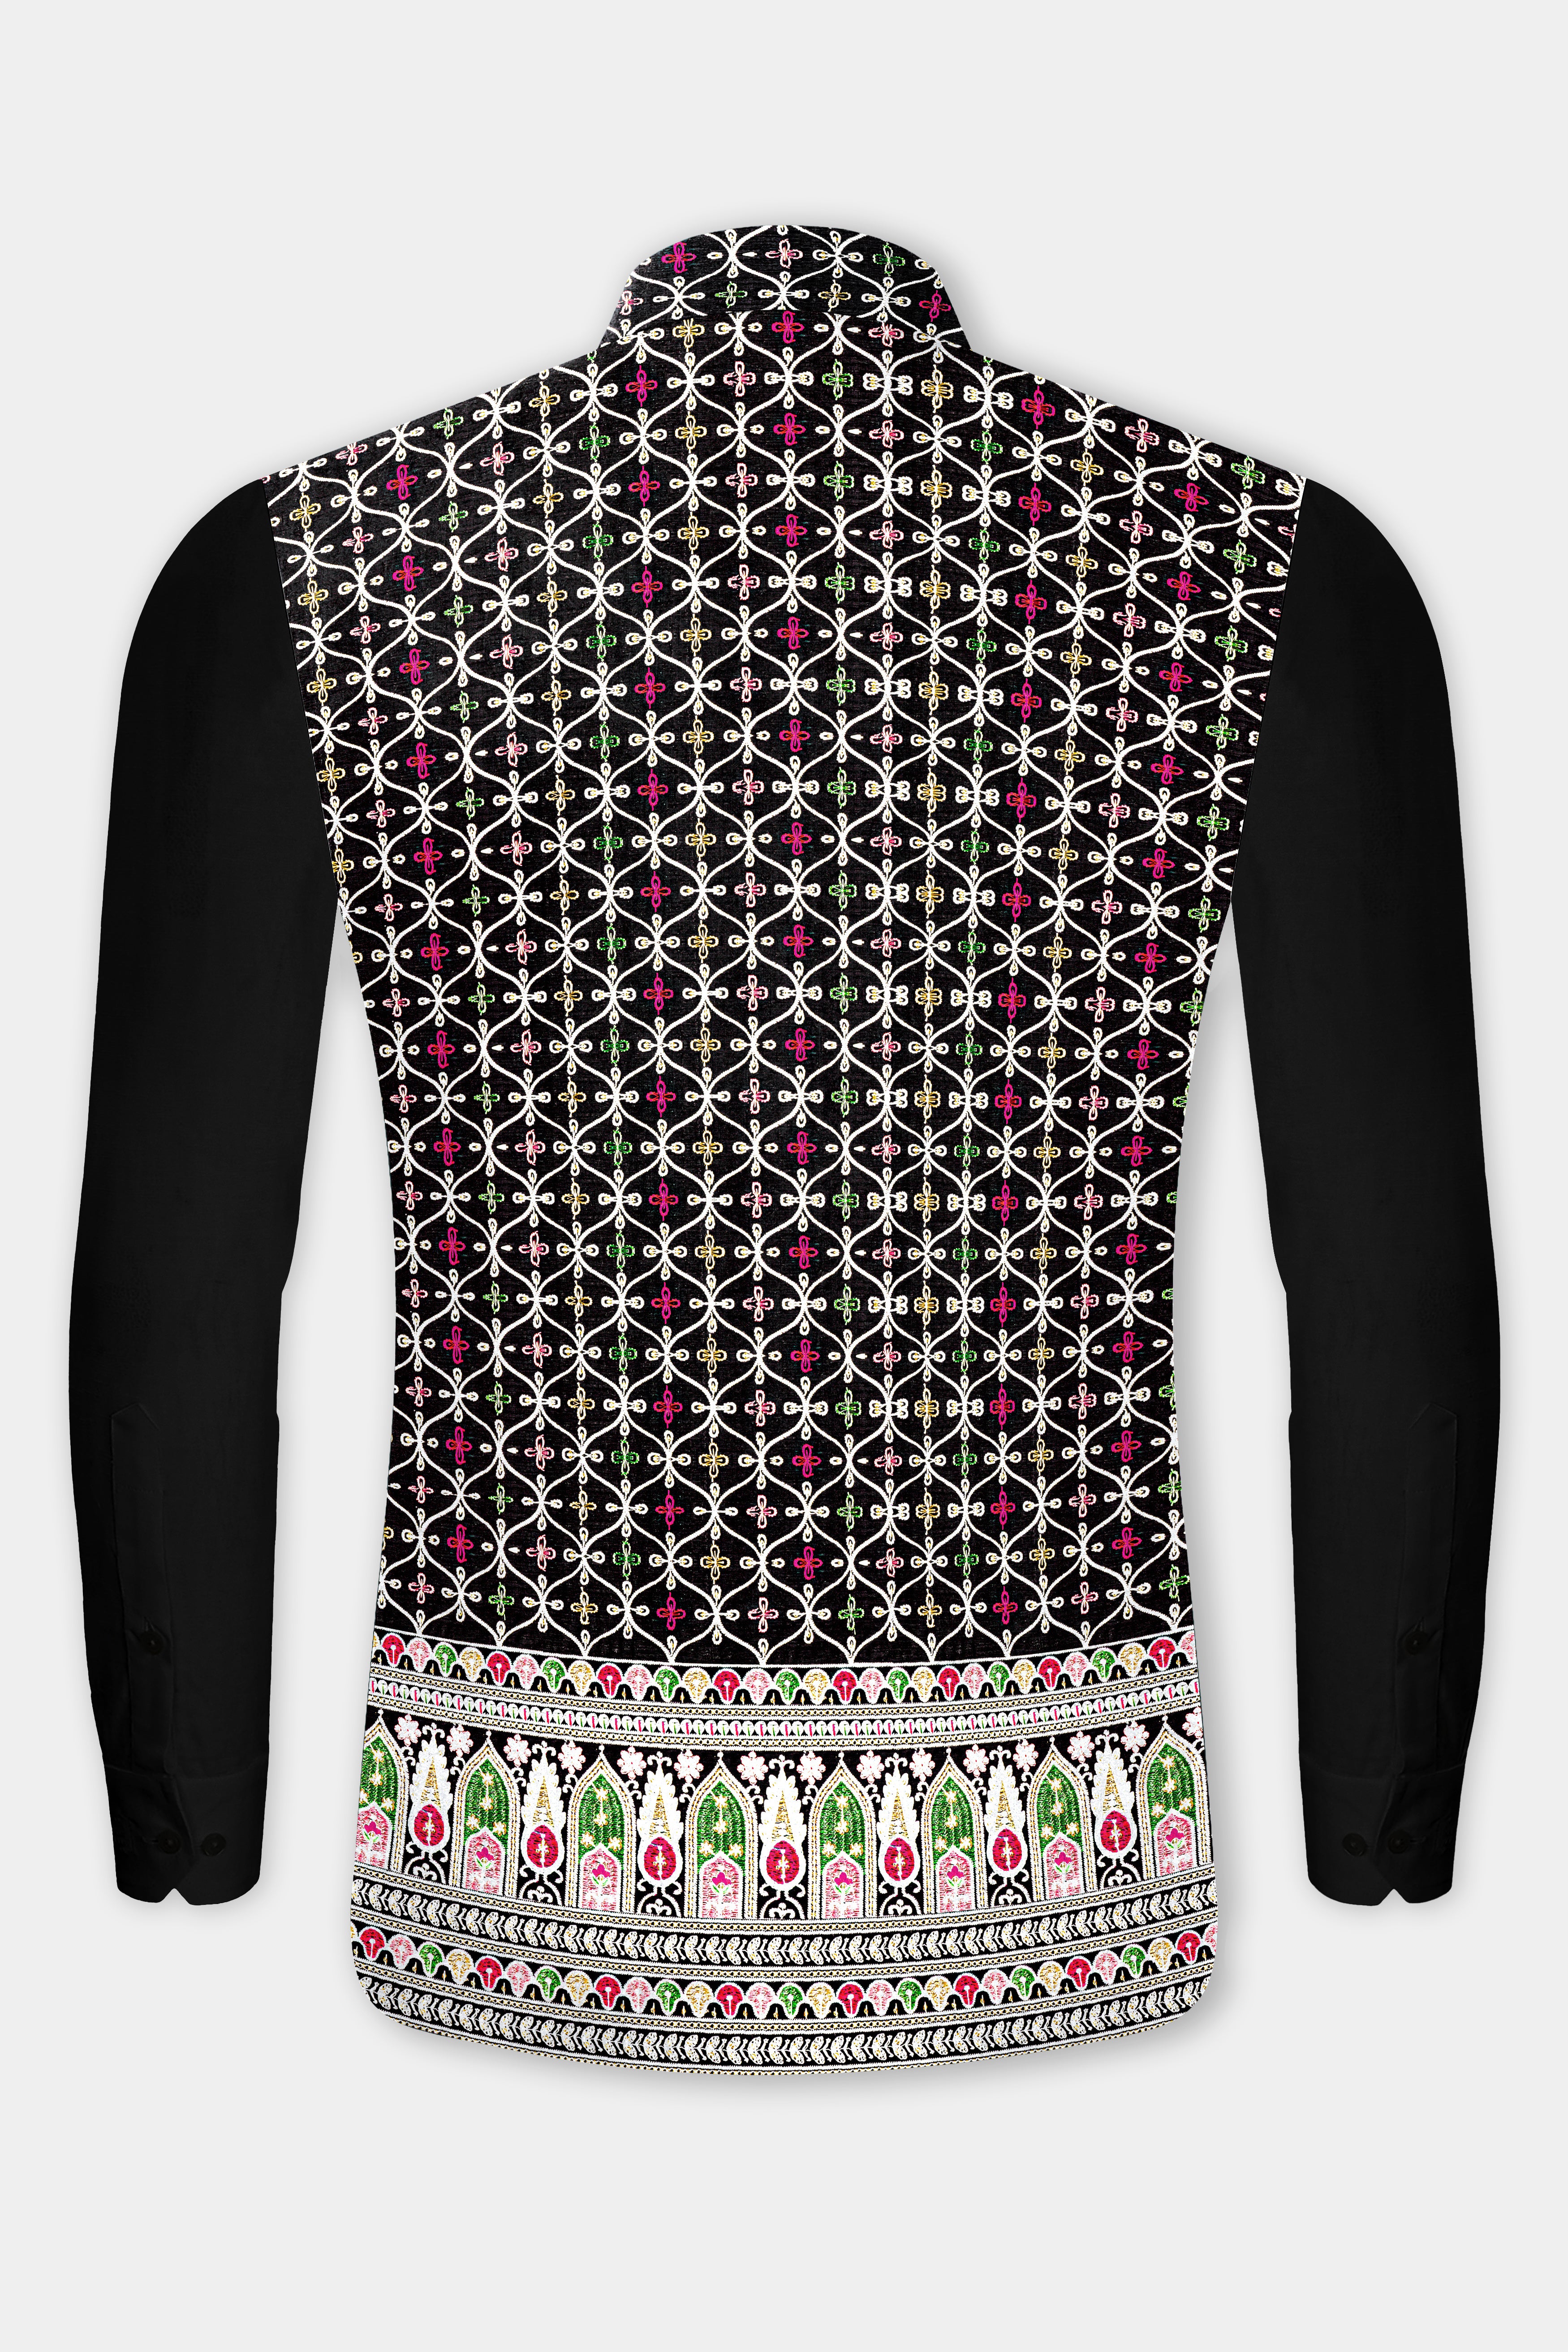 Jade Black and White Multicolour Ogee Pattern Embroidered Nehru Jacket WC3480-36,  WC3480-38,  WC3480-40,  WC3480-42,  WC3480-44,  WC3480-46,  WC3480-48,  WC3480-50,  WC3480-52,  WC3480-54,  WC3480-56,  WC3480-58,  WC3480-60